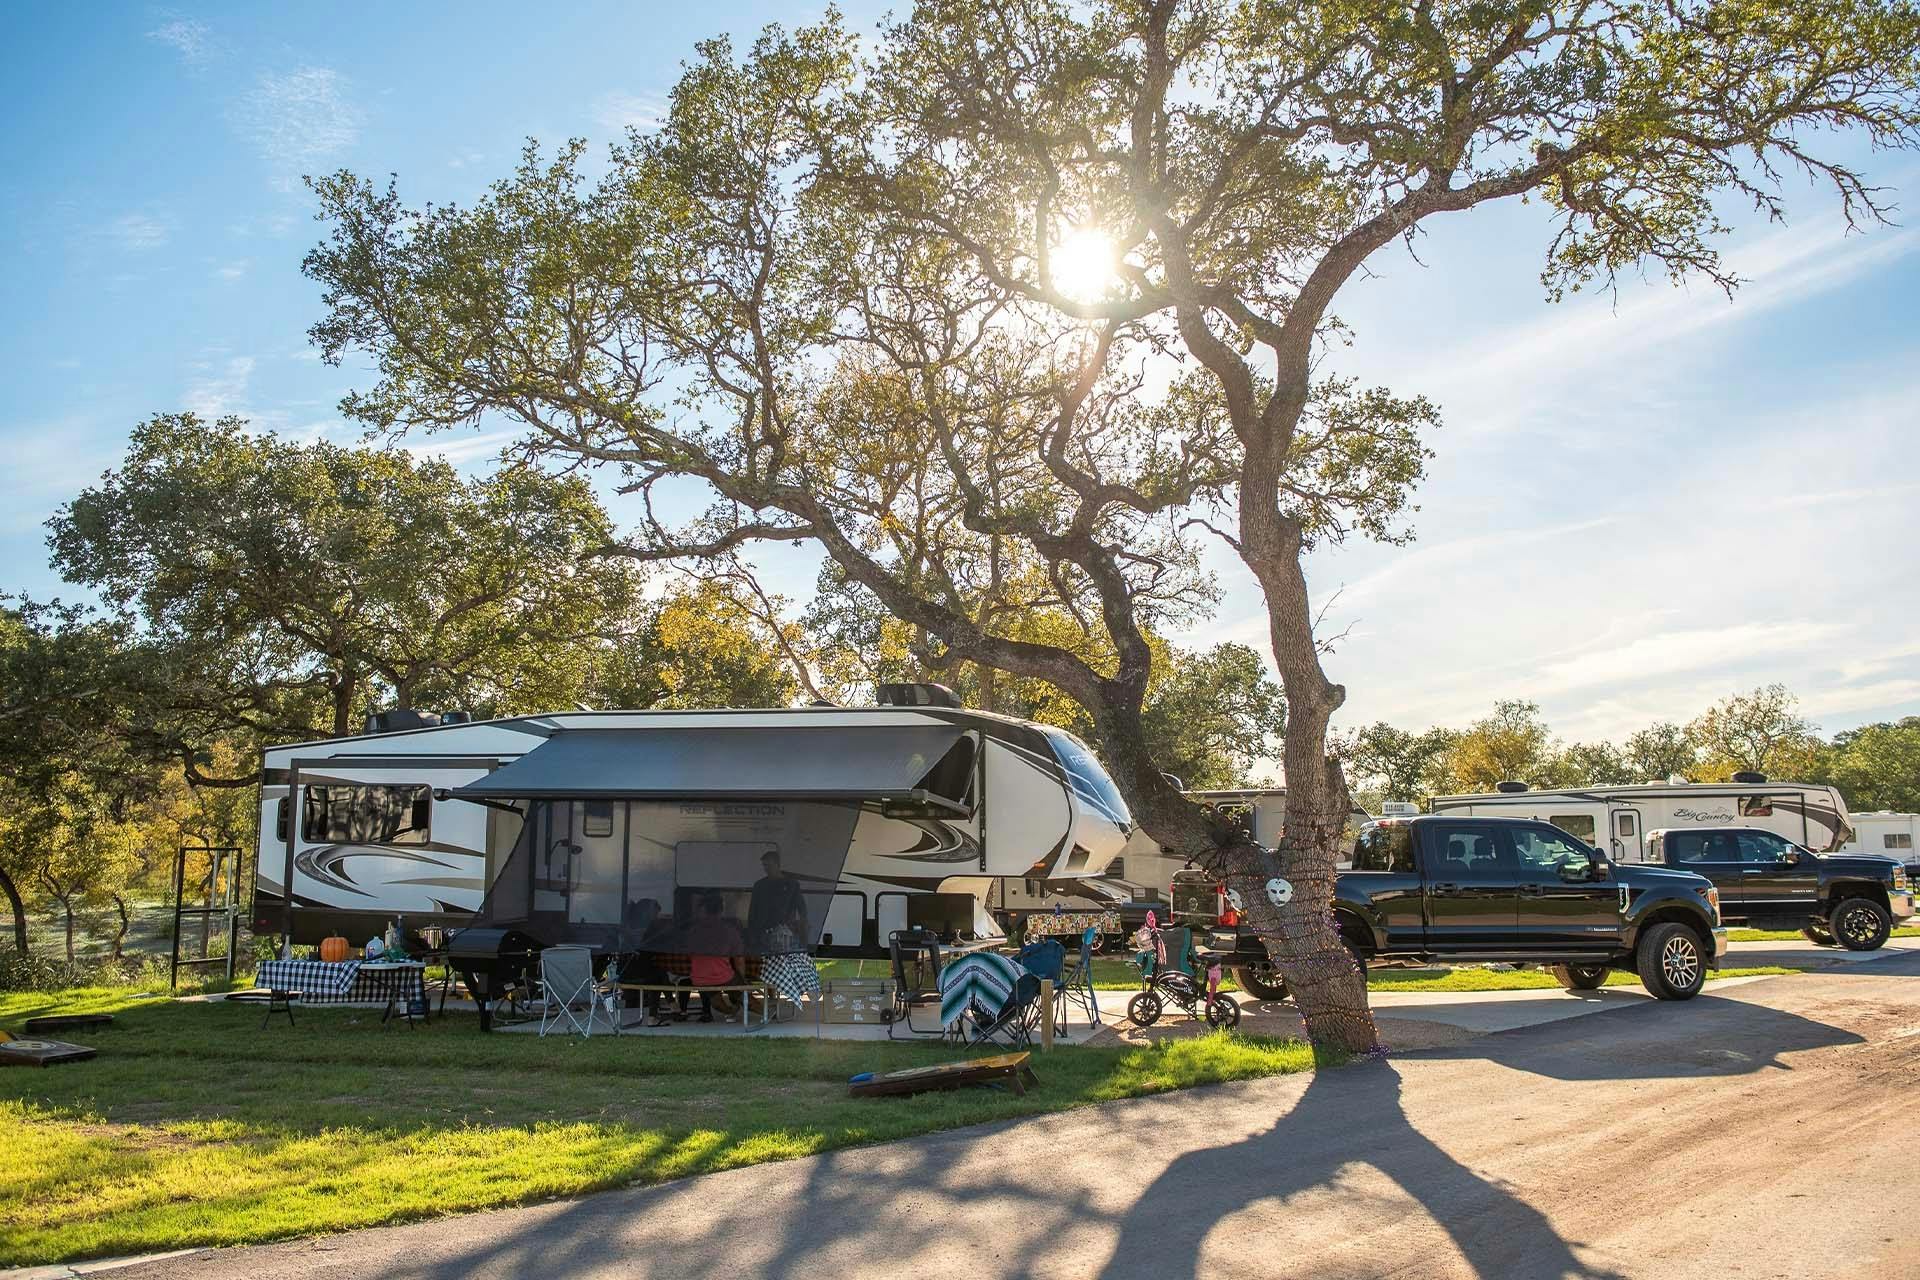 The Best Camping Near Killeen, Texas